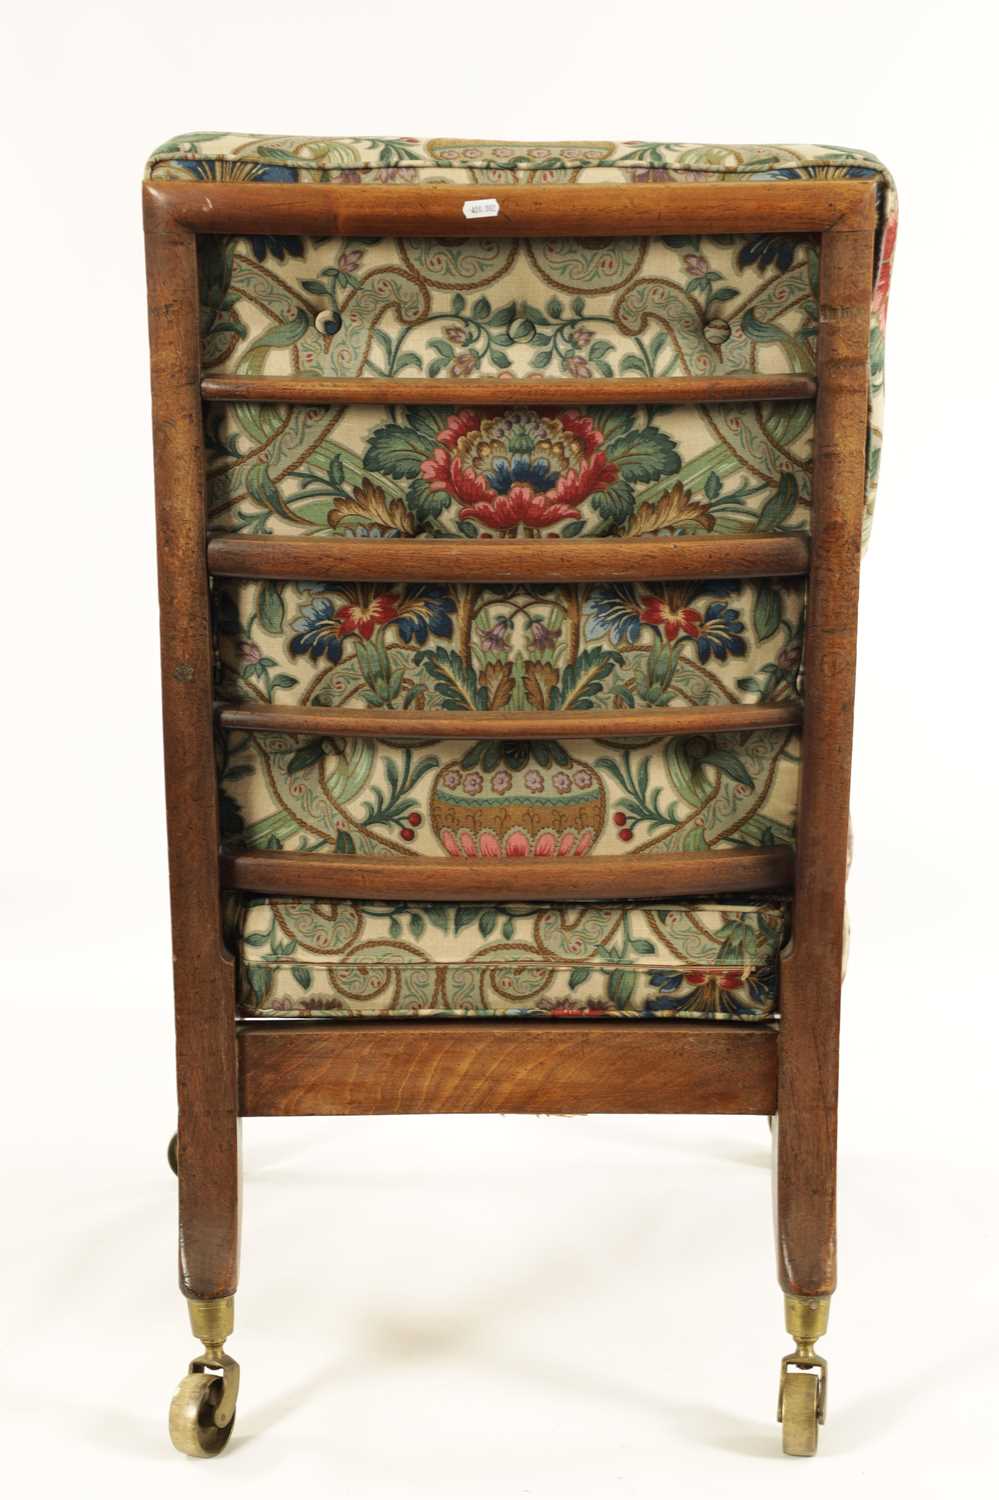 A GEORGE III MAHOGANY LIBRARY CHAIR - Image 8 of 11